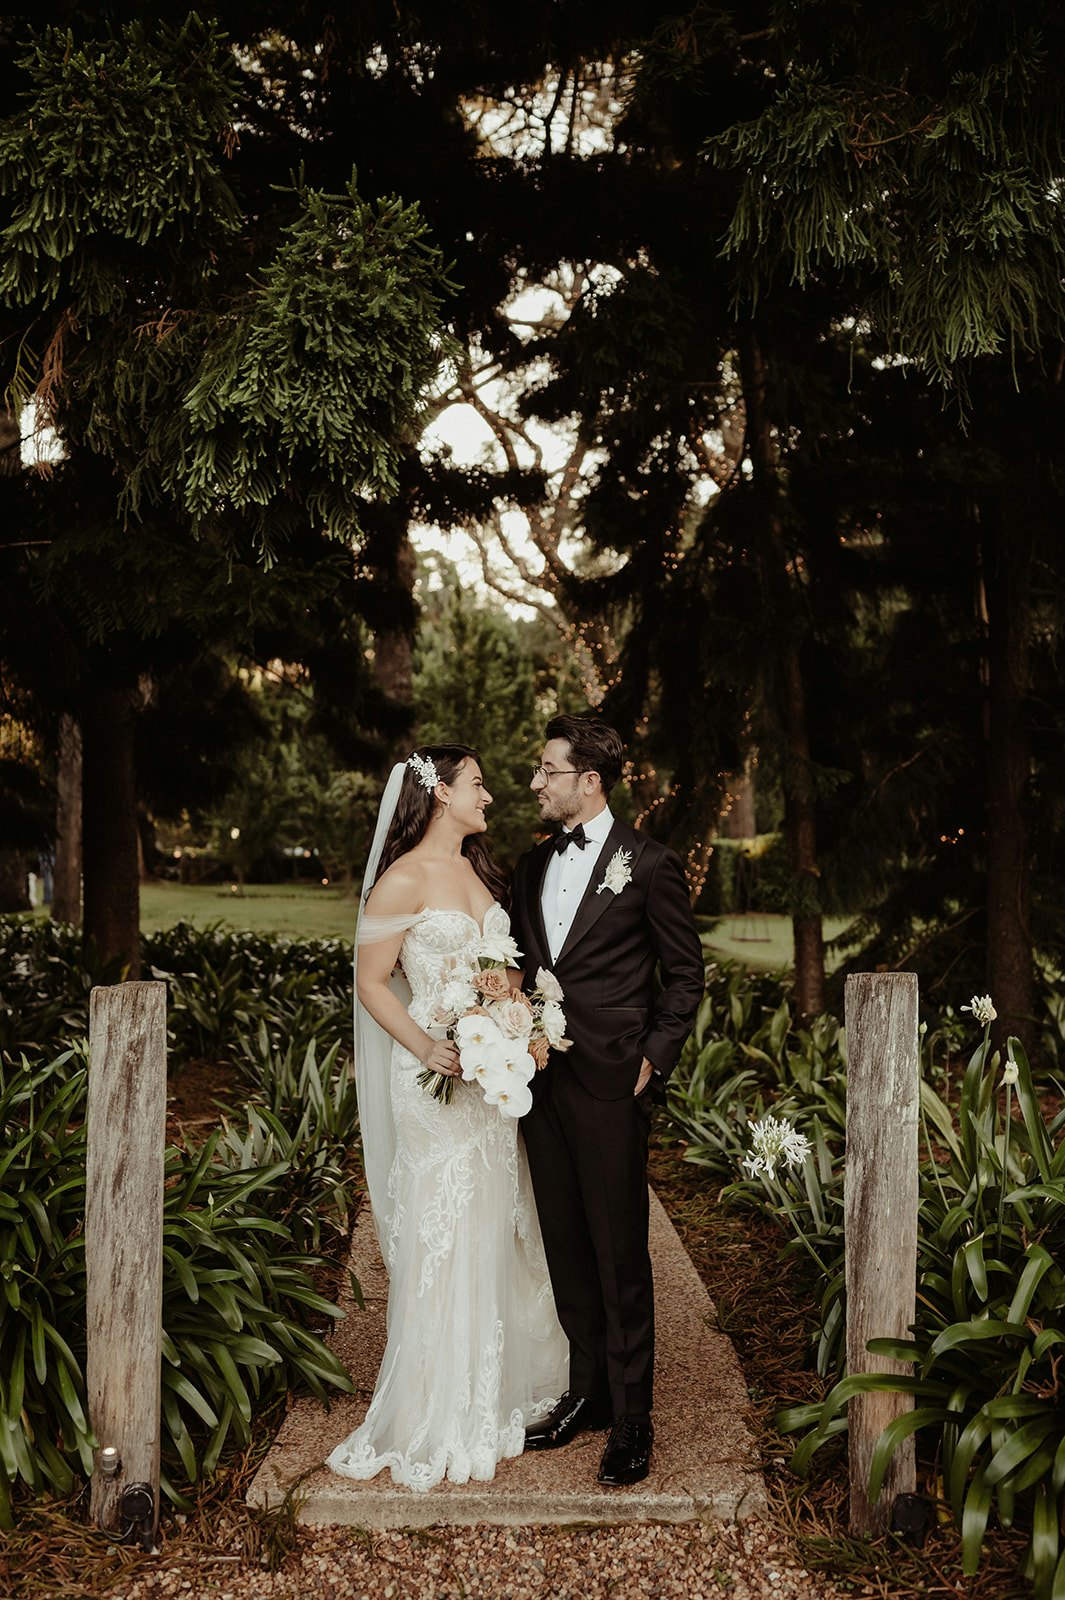 Bride and groom standing on garden path